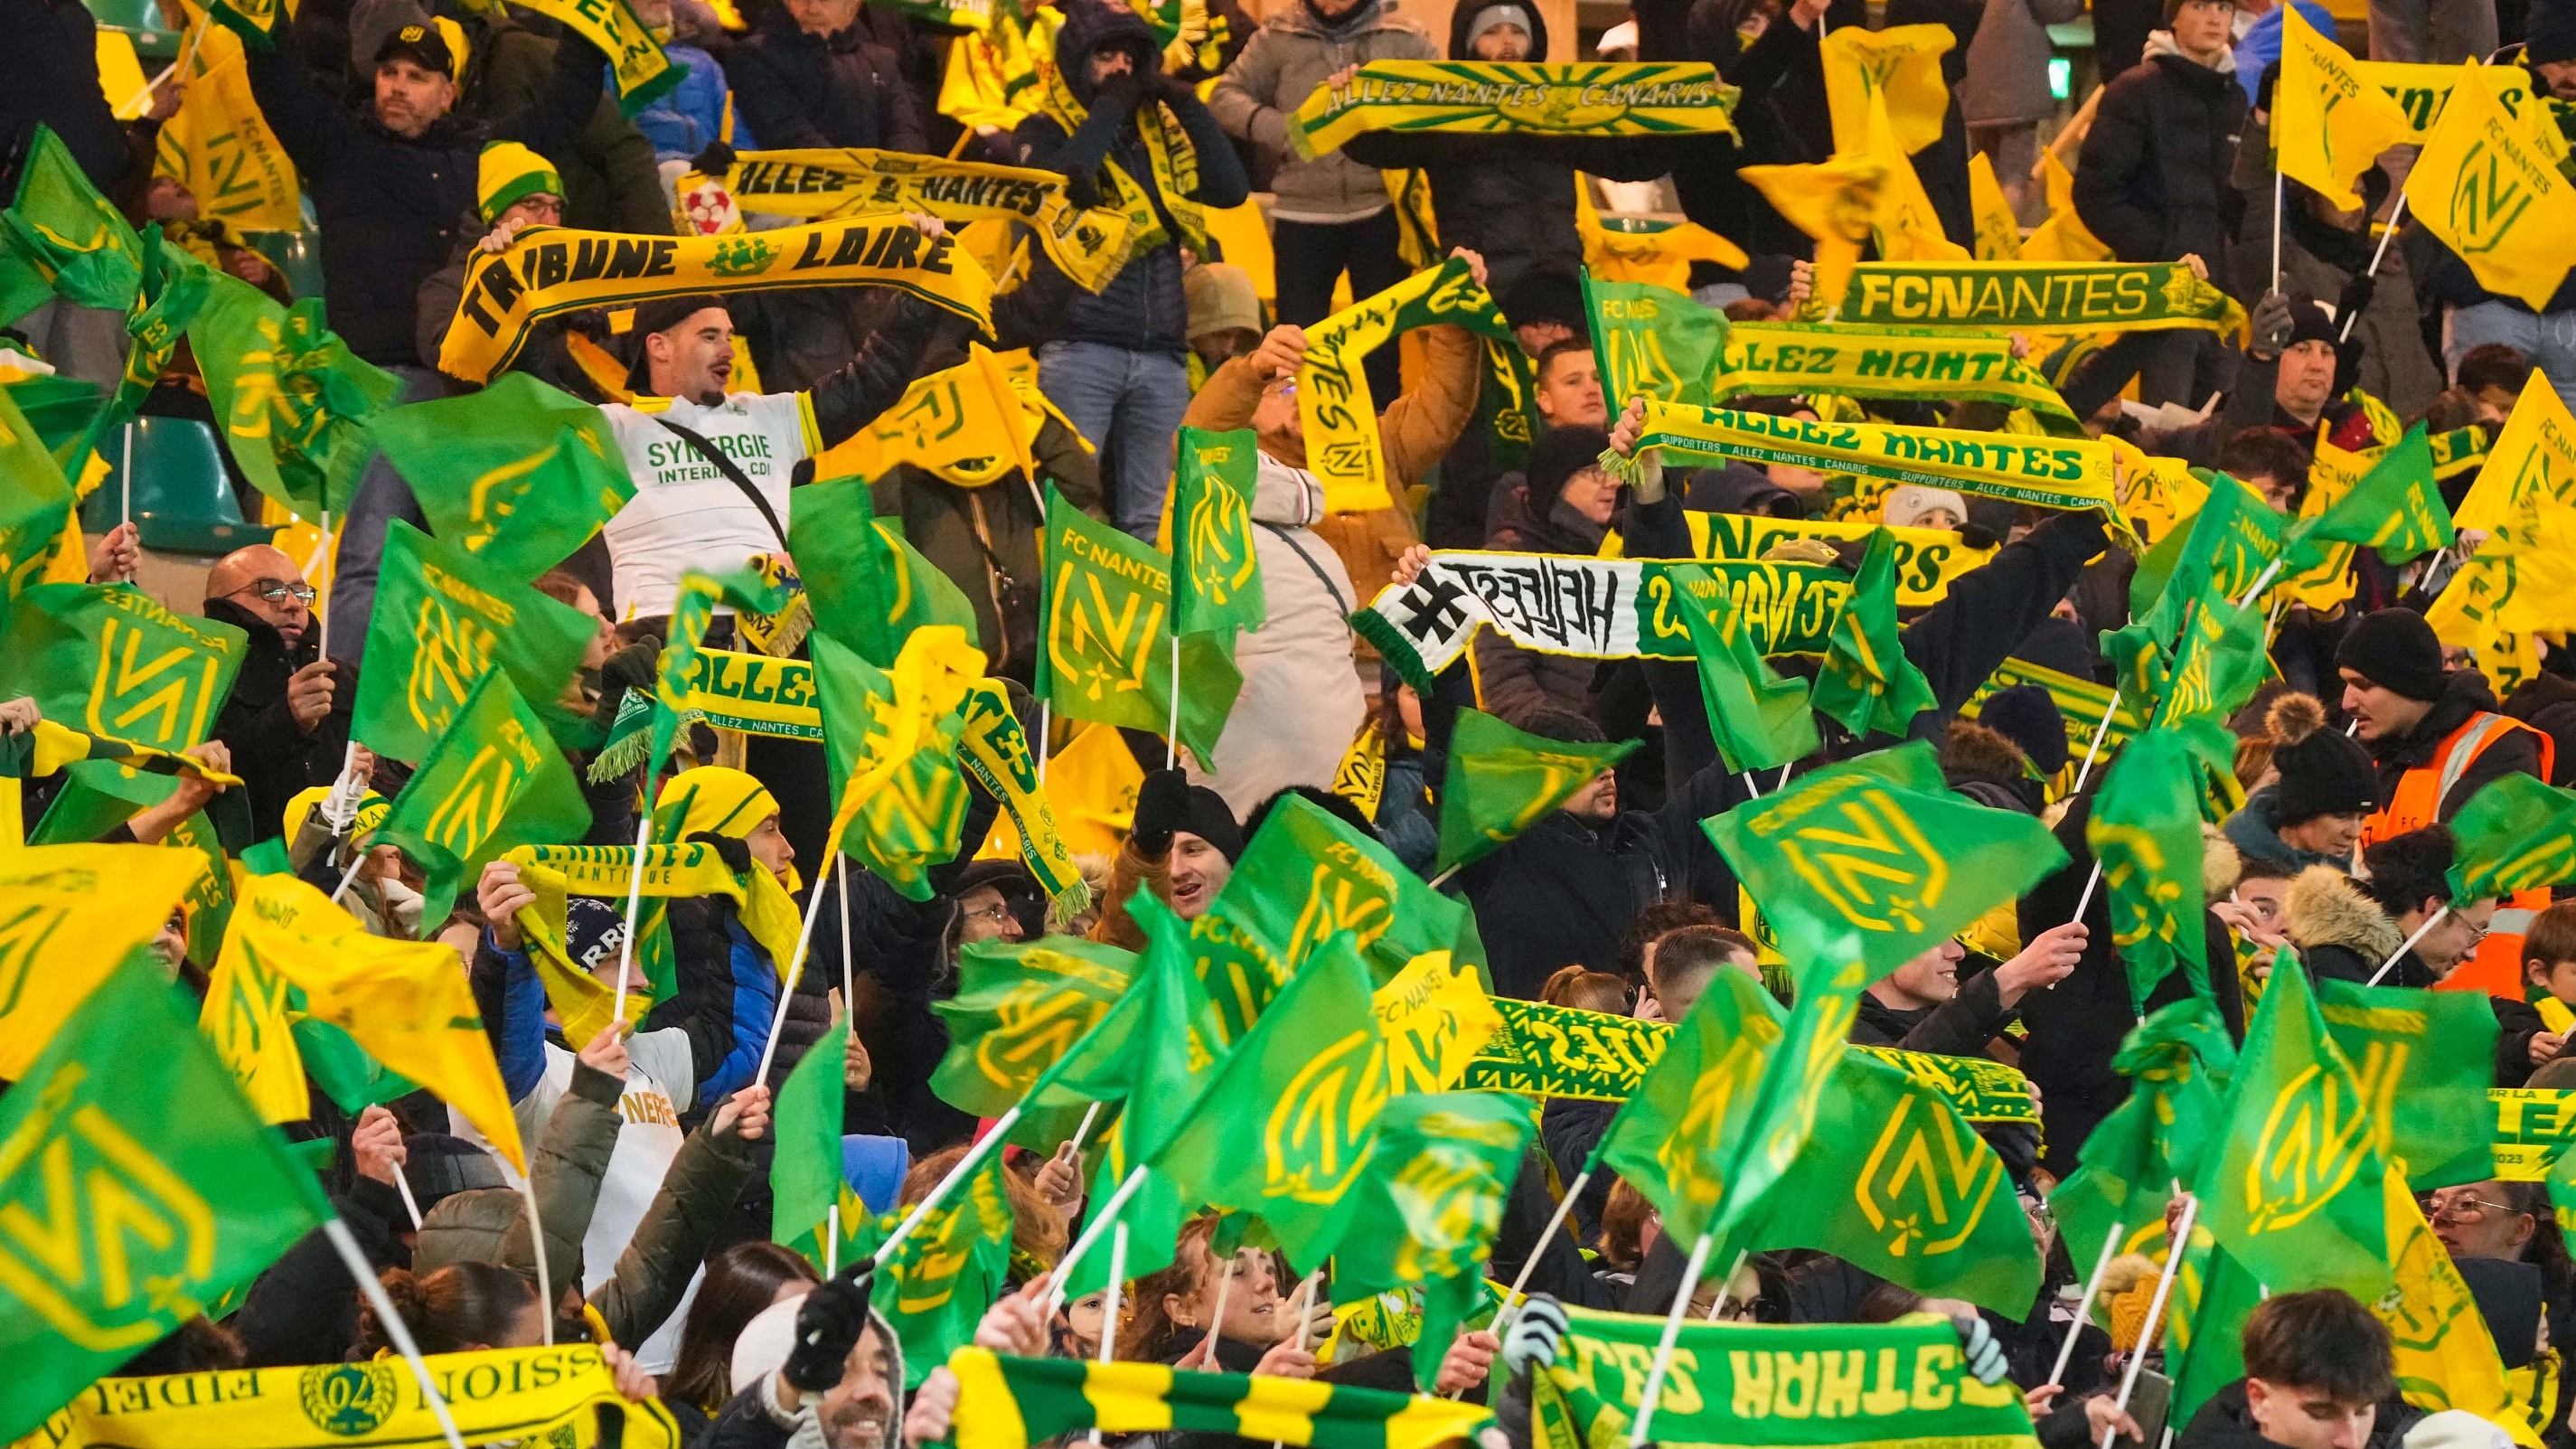 Nantes supporter deceased: VTC driver in police custody